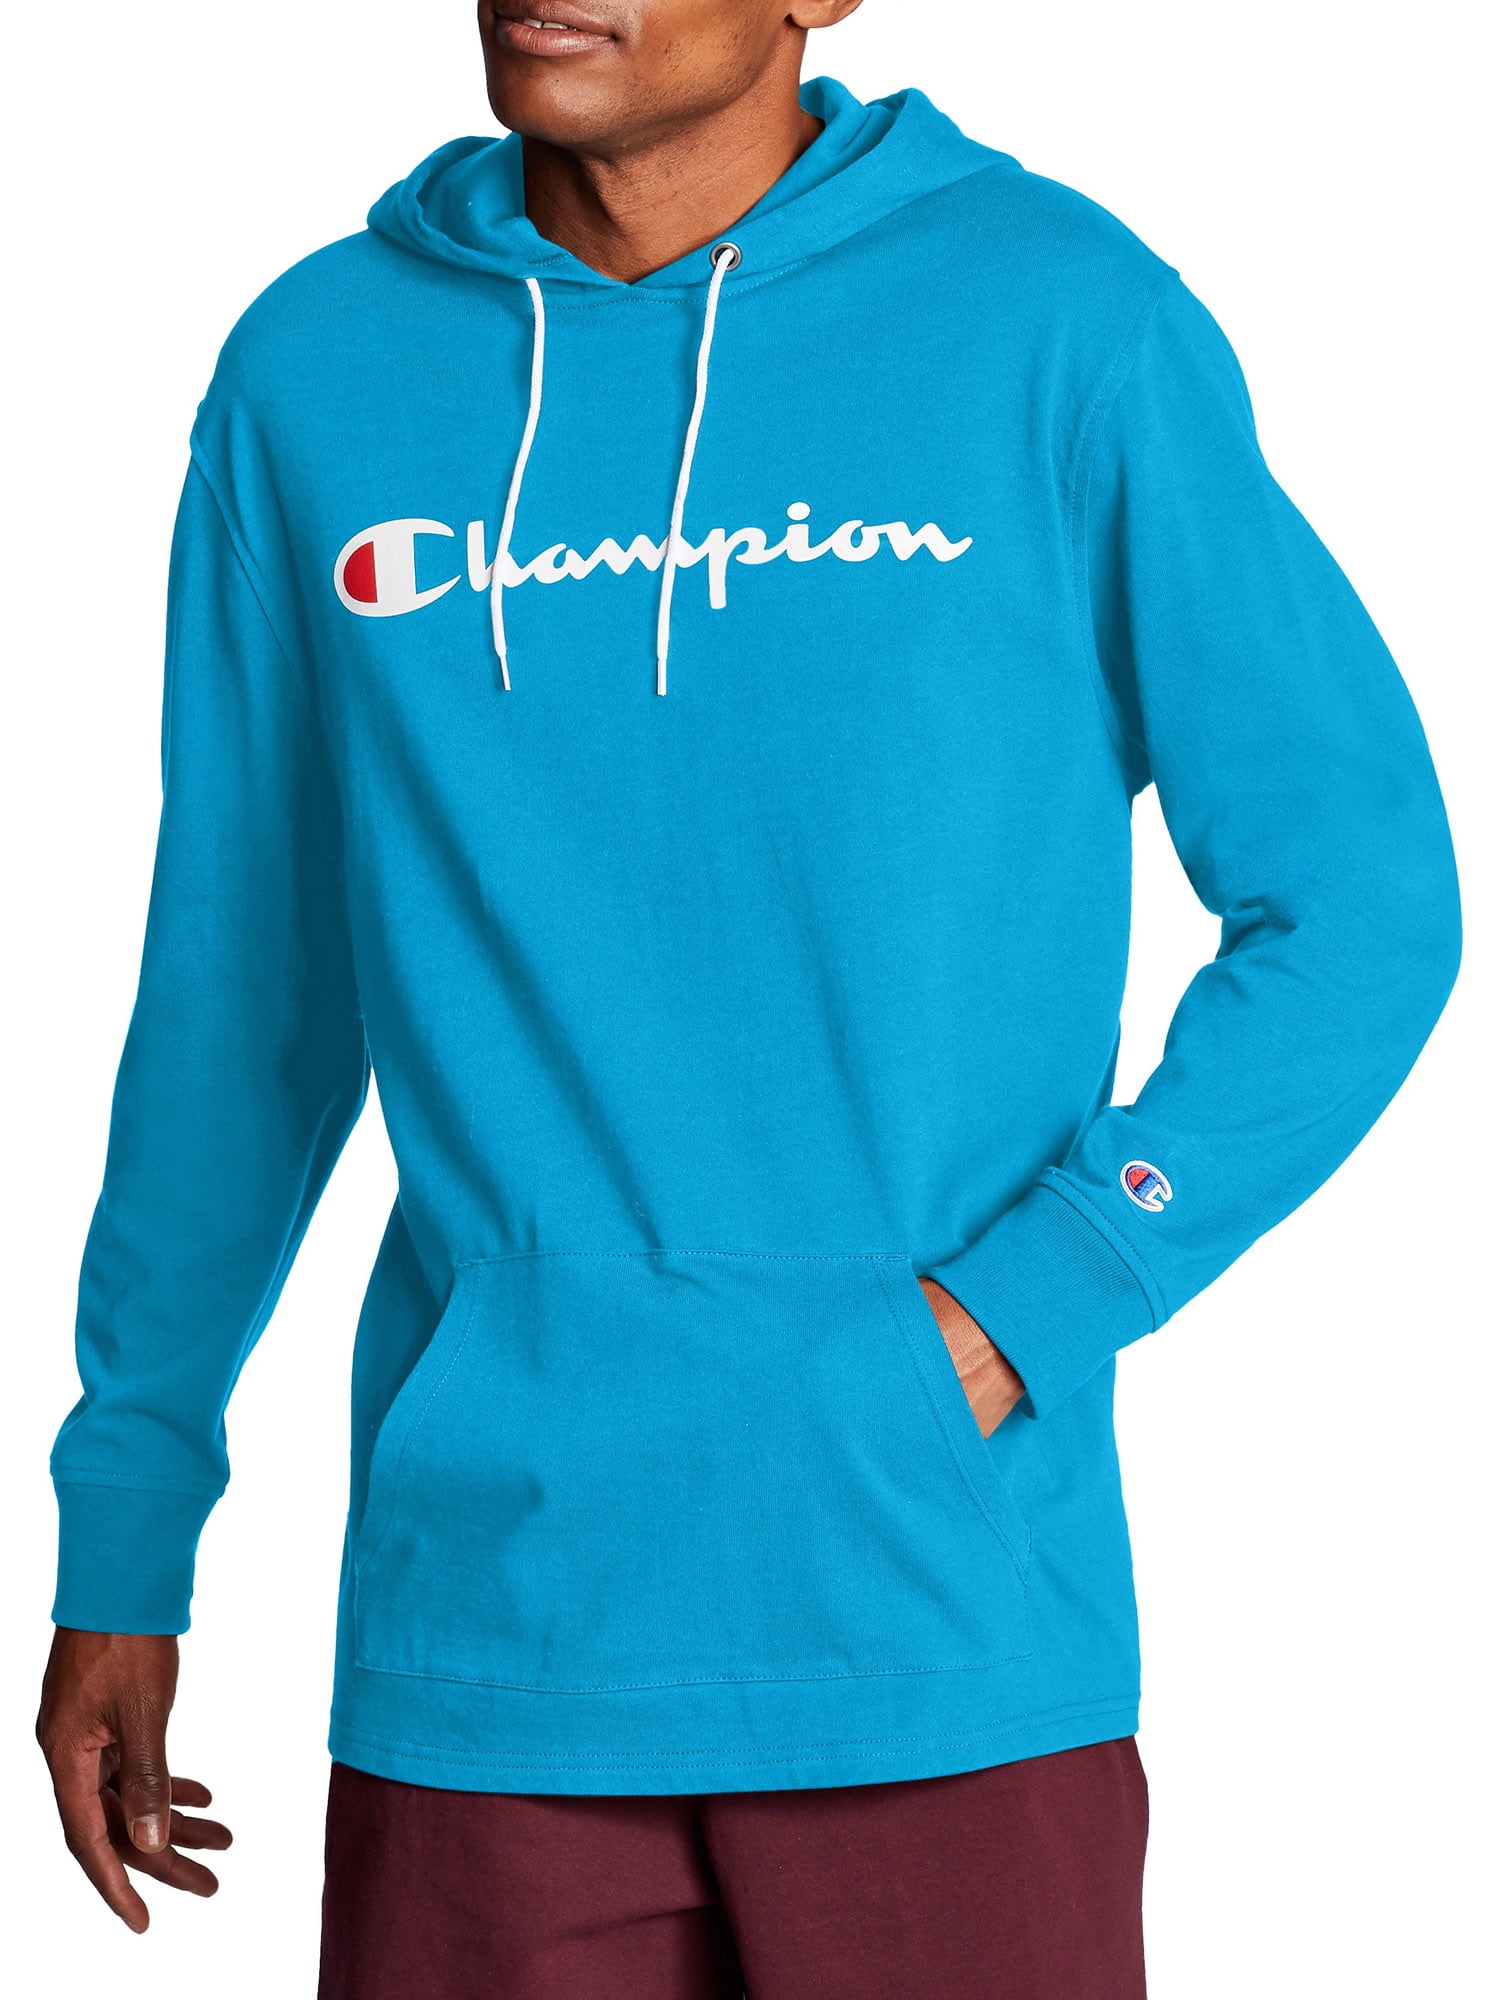 where can i find a champion hoodie